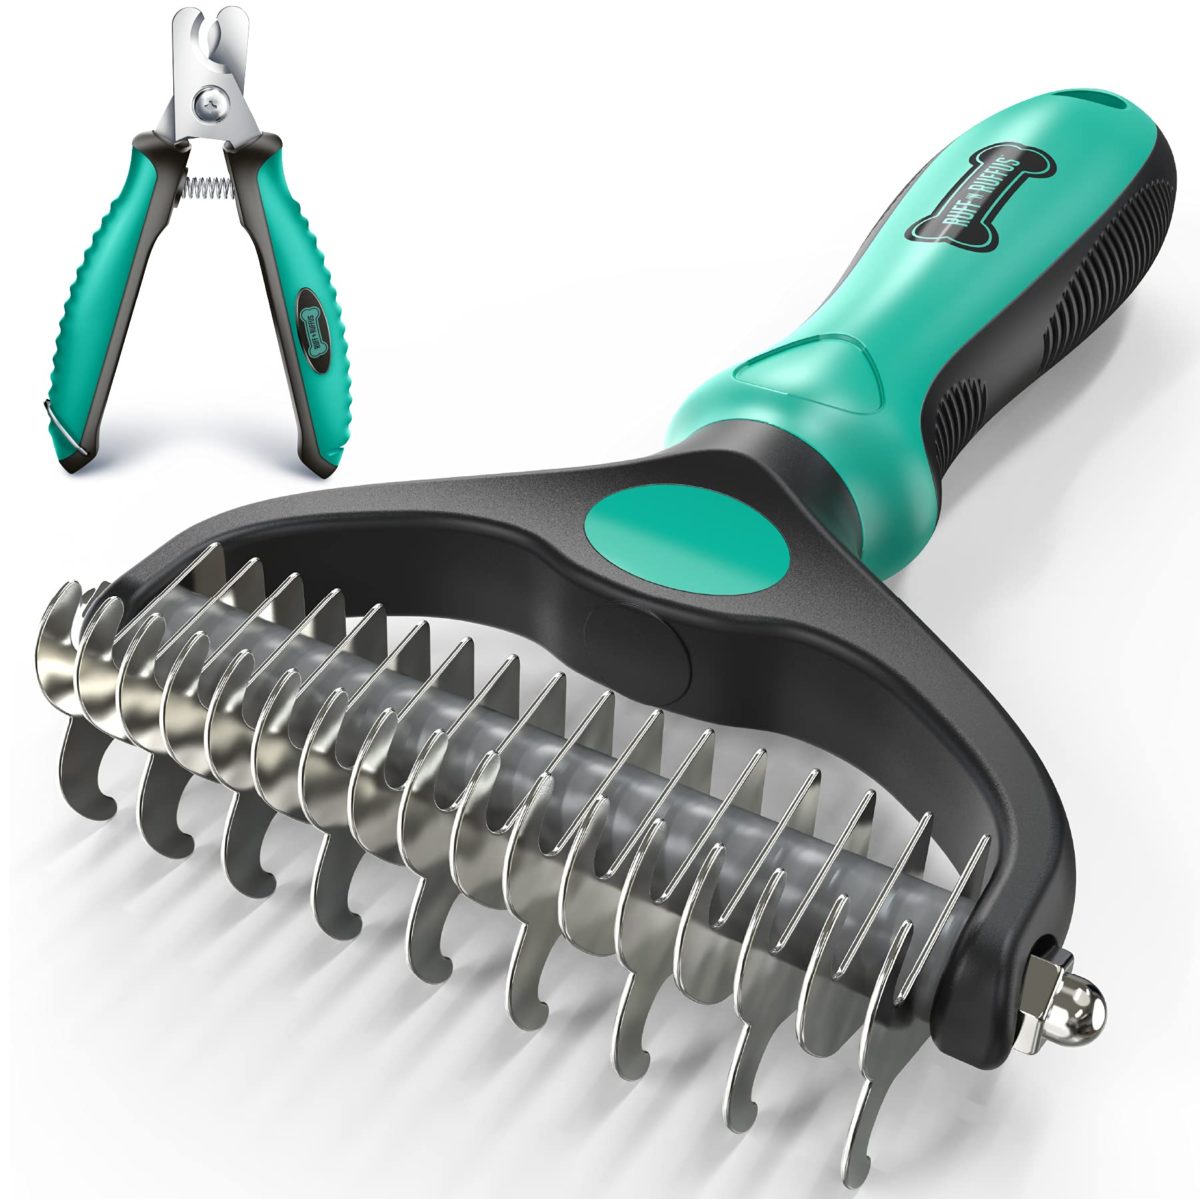 Double Sided Pet Undercoat Rake Brush 100% Pain-Free Our Dematting Brush is designed with Sharpened however Fine Rounded Teeth, permits you simply and safely take away mats, tangles, knots, free hair with out irritation or scratching Forget about shedding Regular brushing simply removes useless undercoat so no fur goes flying. Skin therapeutic massage ensures higher blood circulation selling wholesome and glossy coat. Perfect for medium and lengthy haired pets